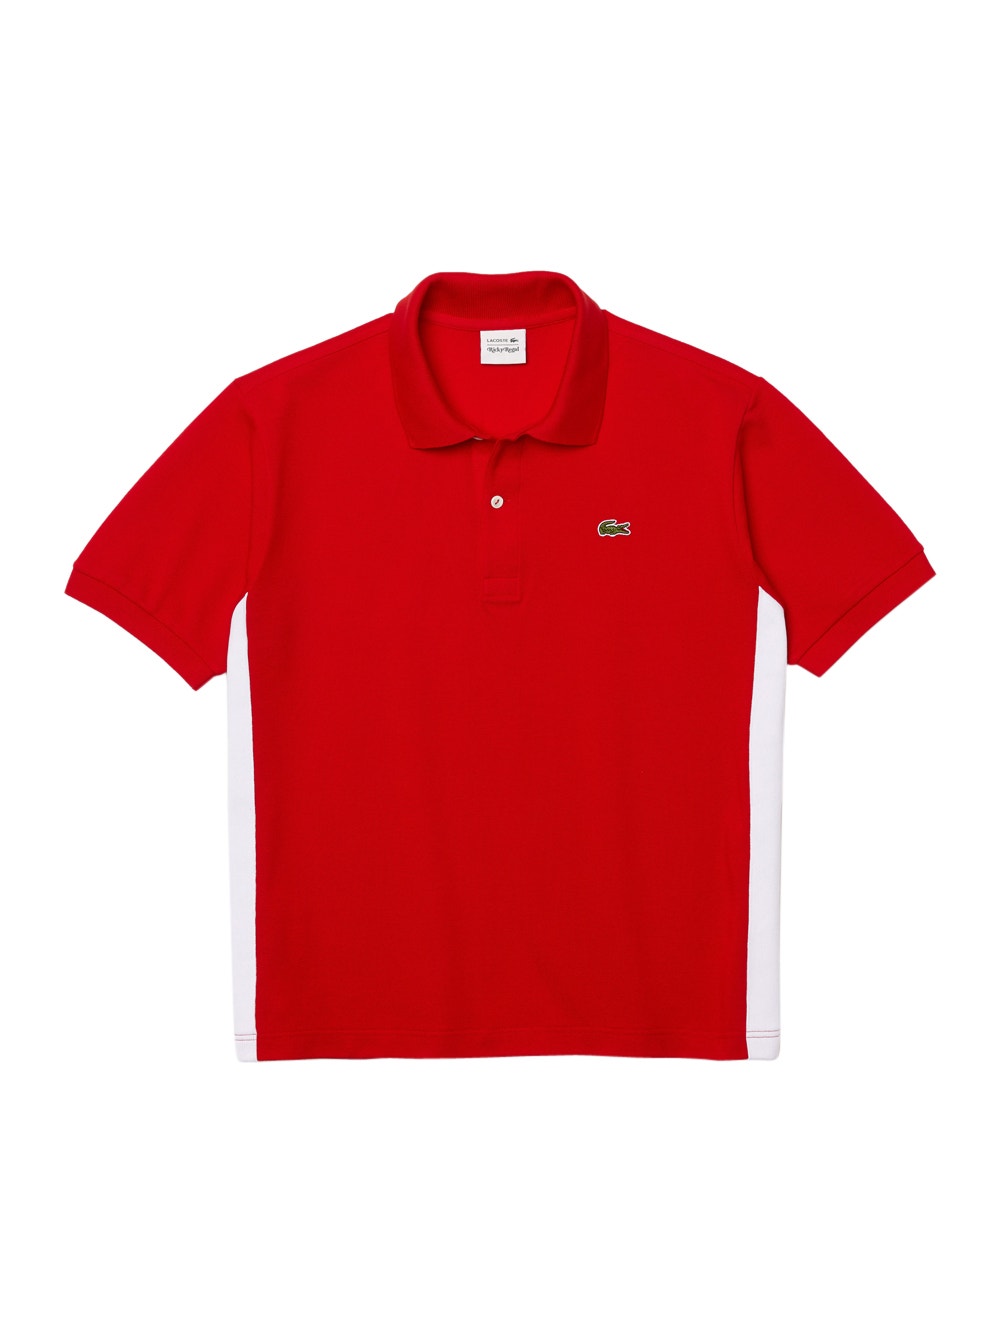 red lacoste shirt